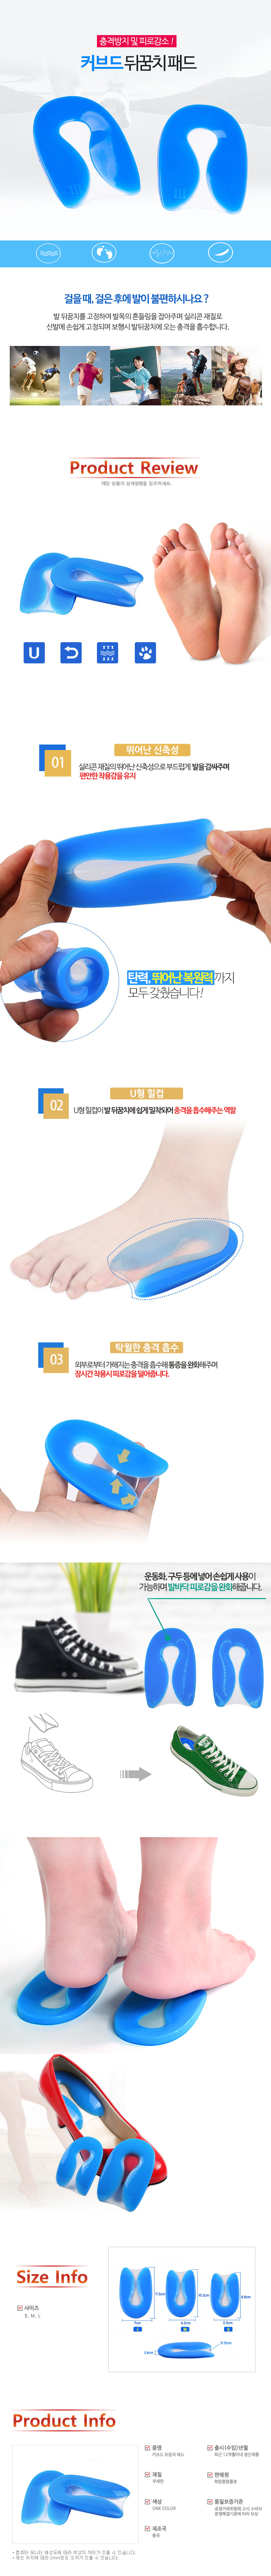 curved_insole_pad_detail.jpg